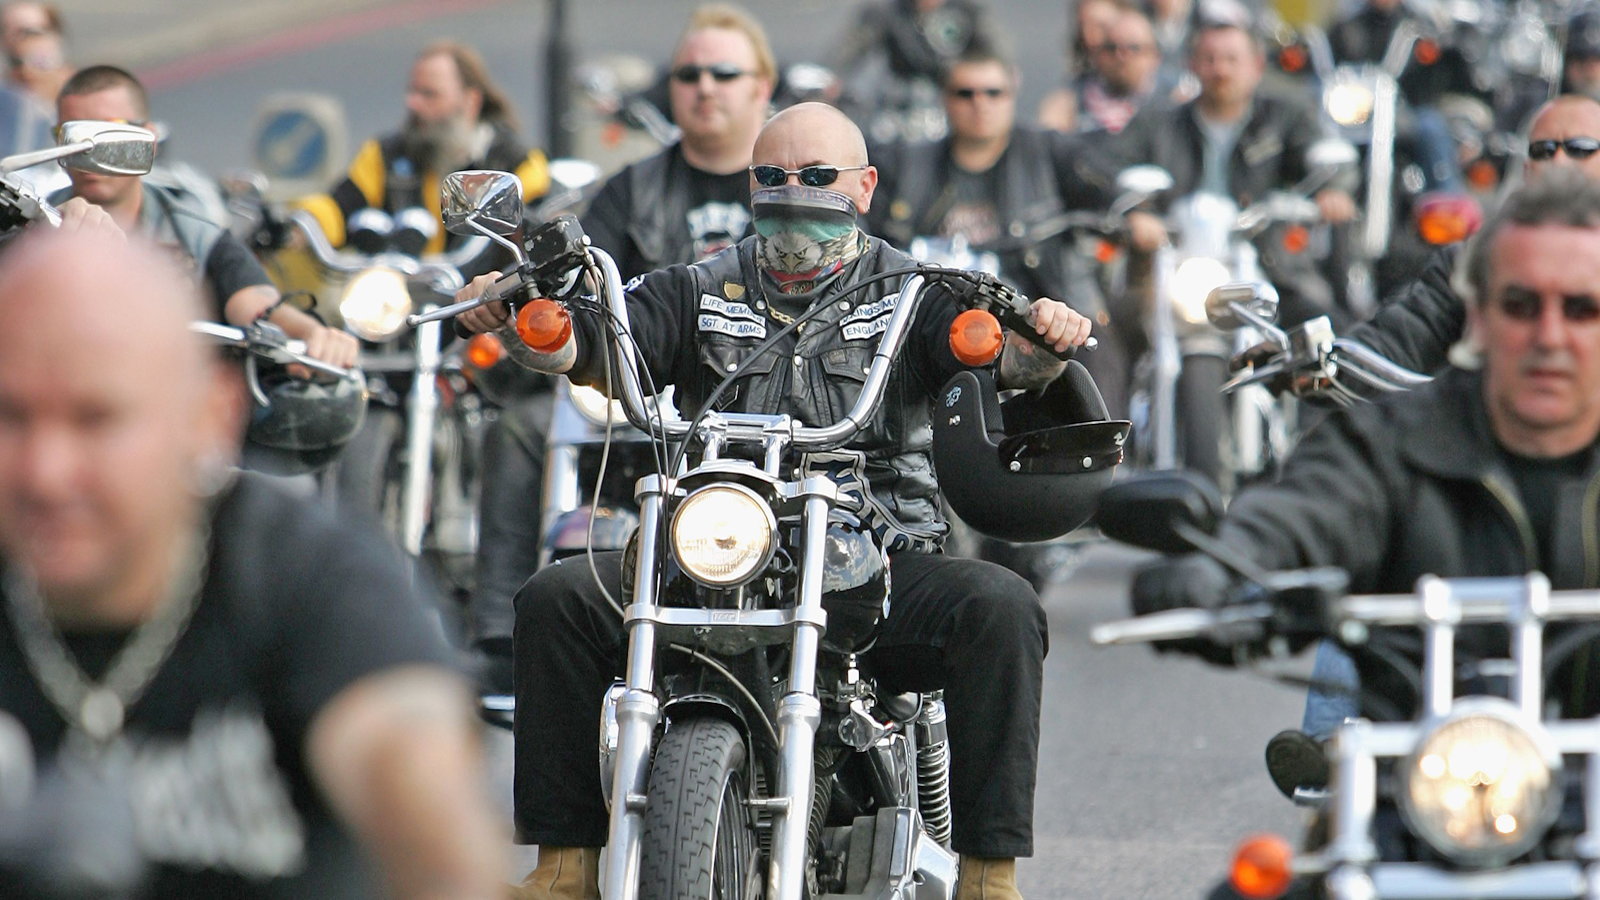 Daily Slideshow: Some of the Most Notorious Outlaw Bike Clubs | Hdforums